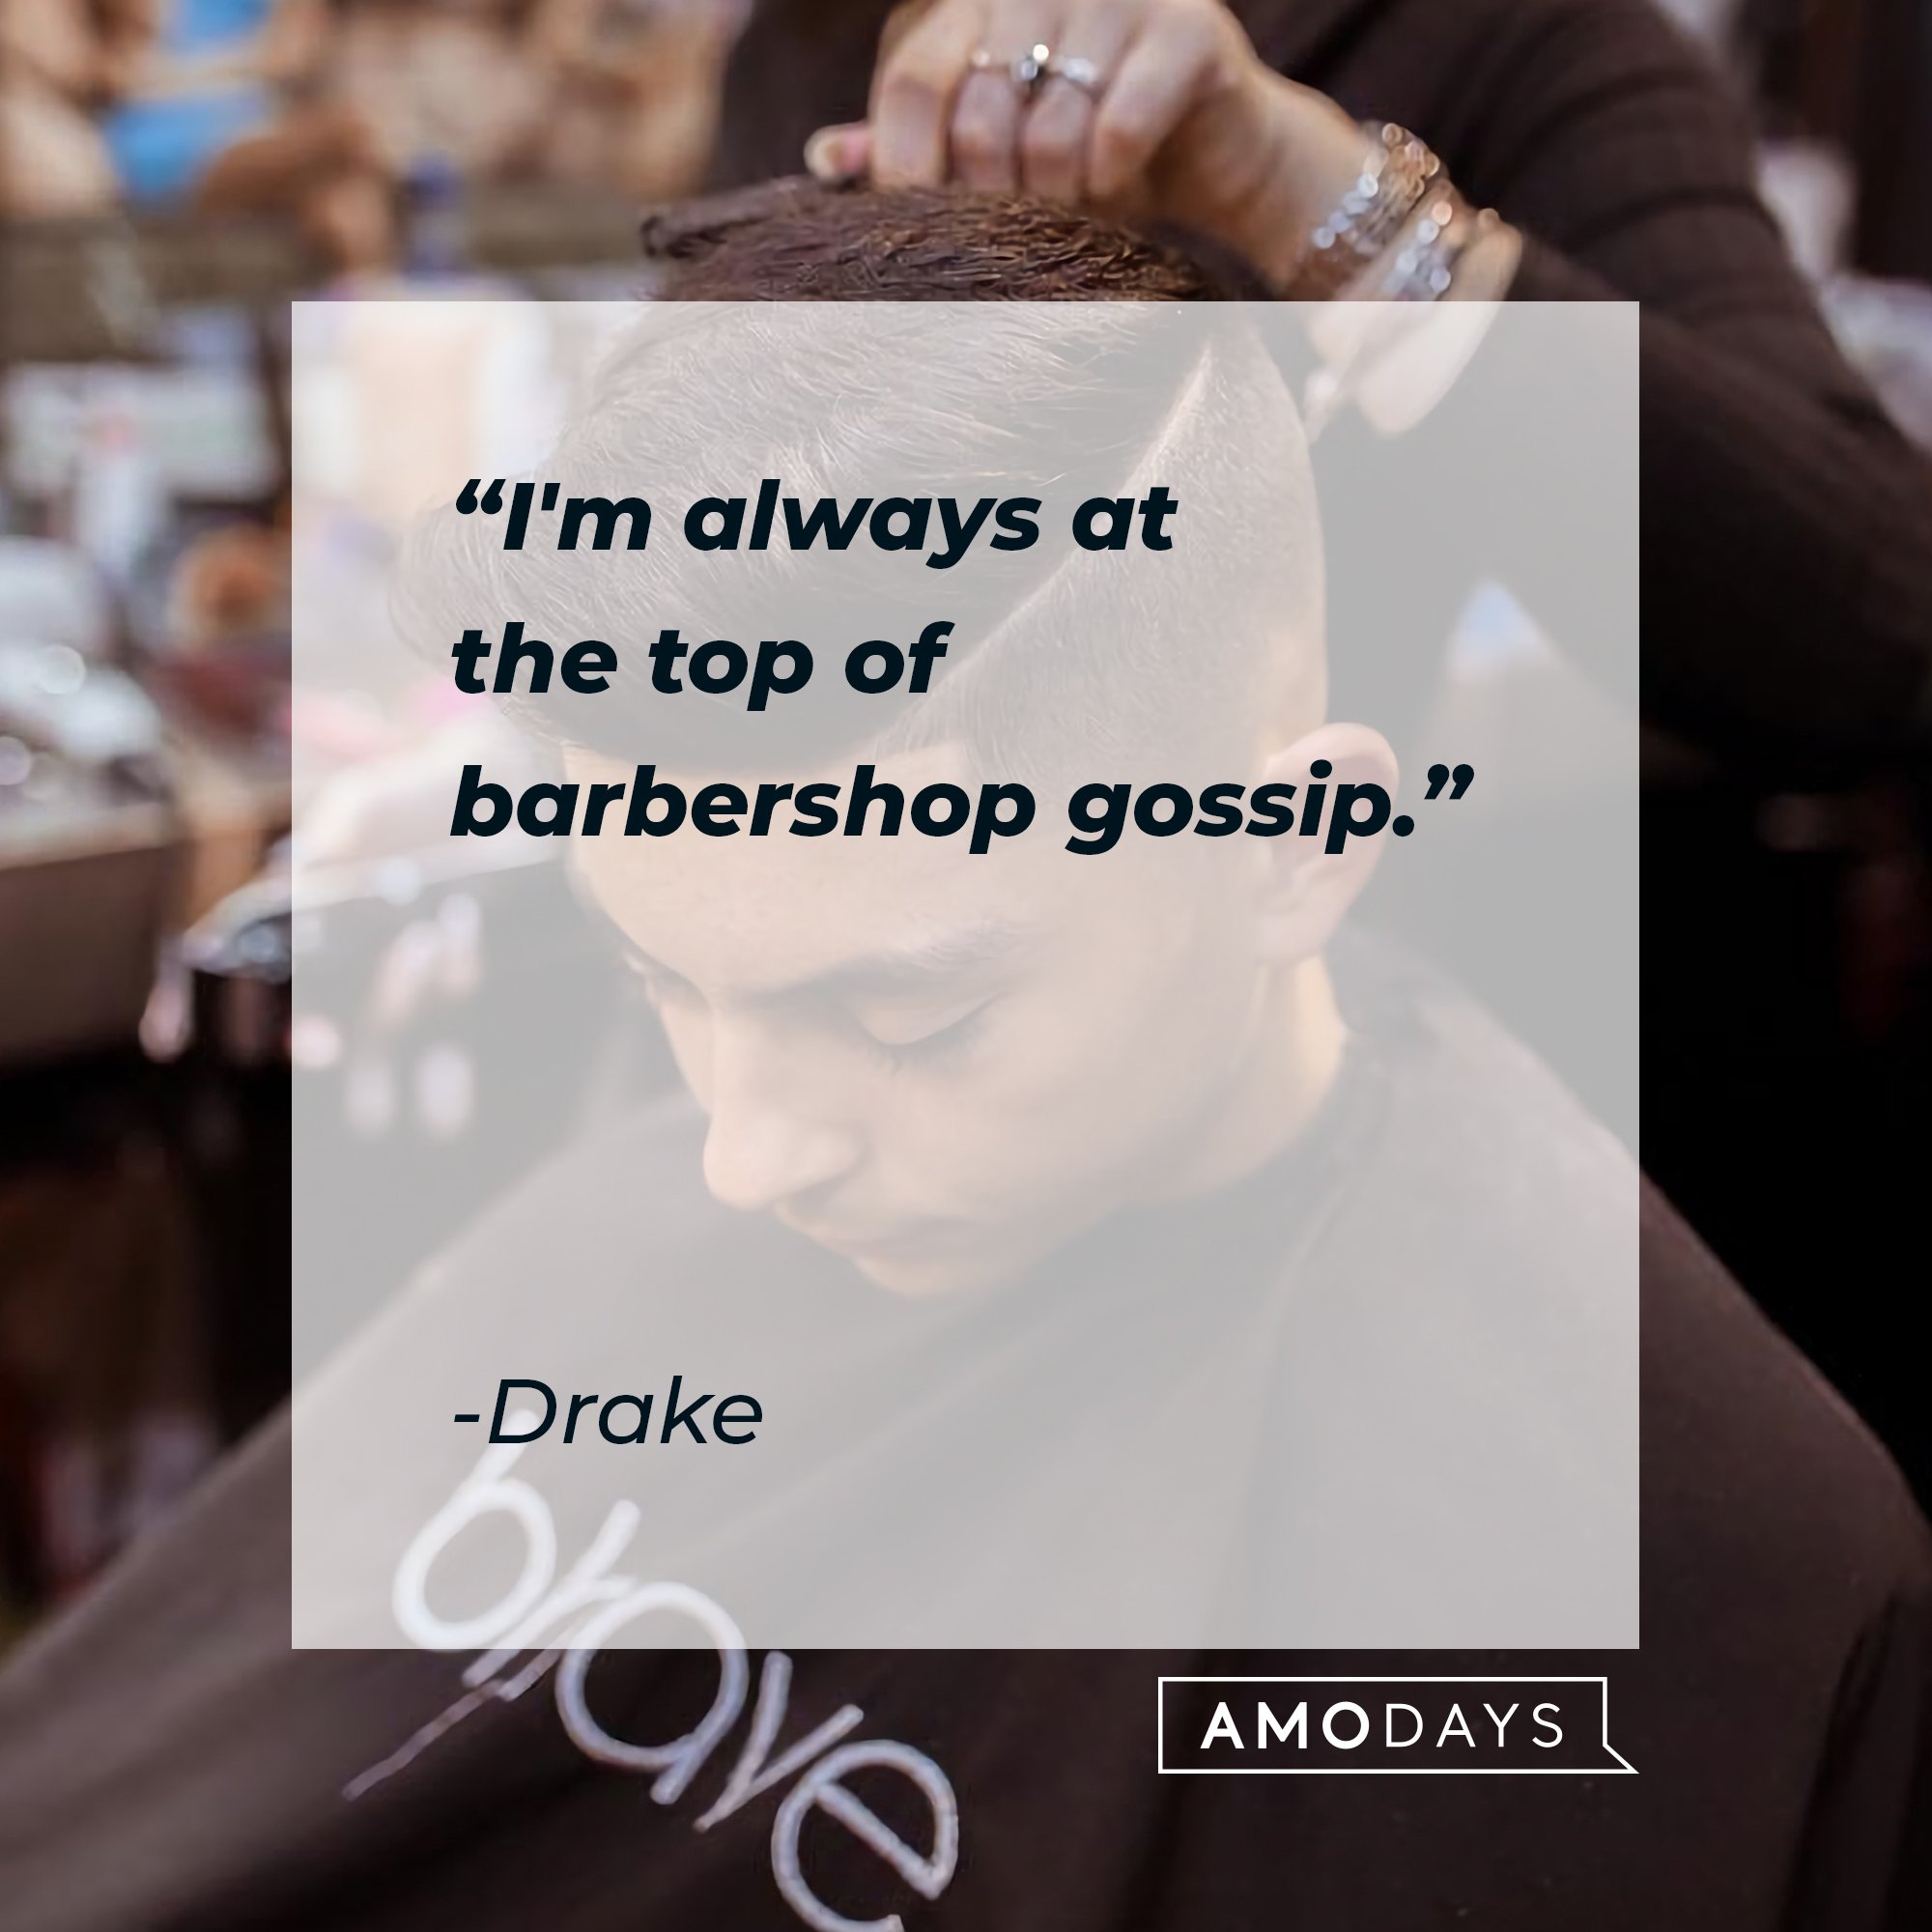 Drake's quote: "I'm always at the top of barbershop gossip." | Image: AmoDays